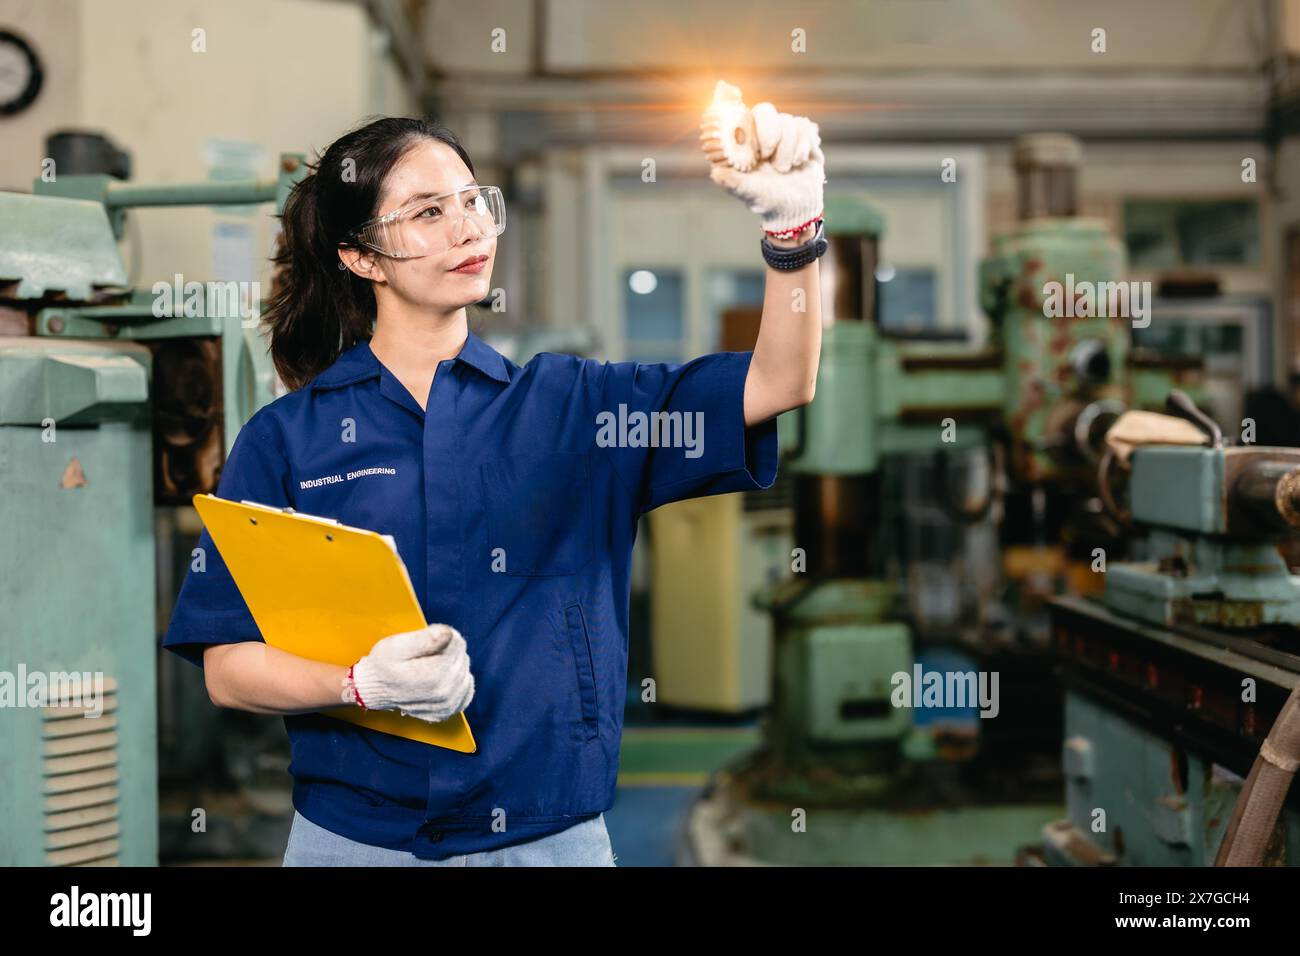 professional engineer worker with safety eyes protection focus working in metal lathe milling machine heavy industry factory. Stock Photo